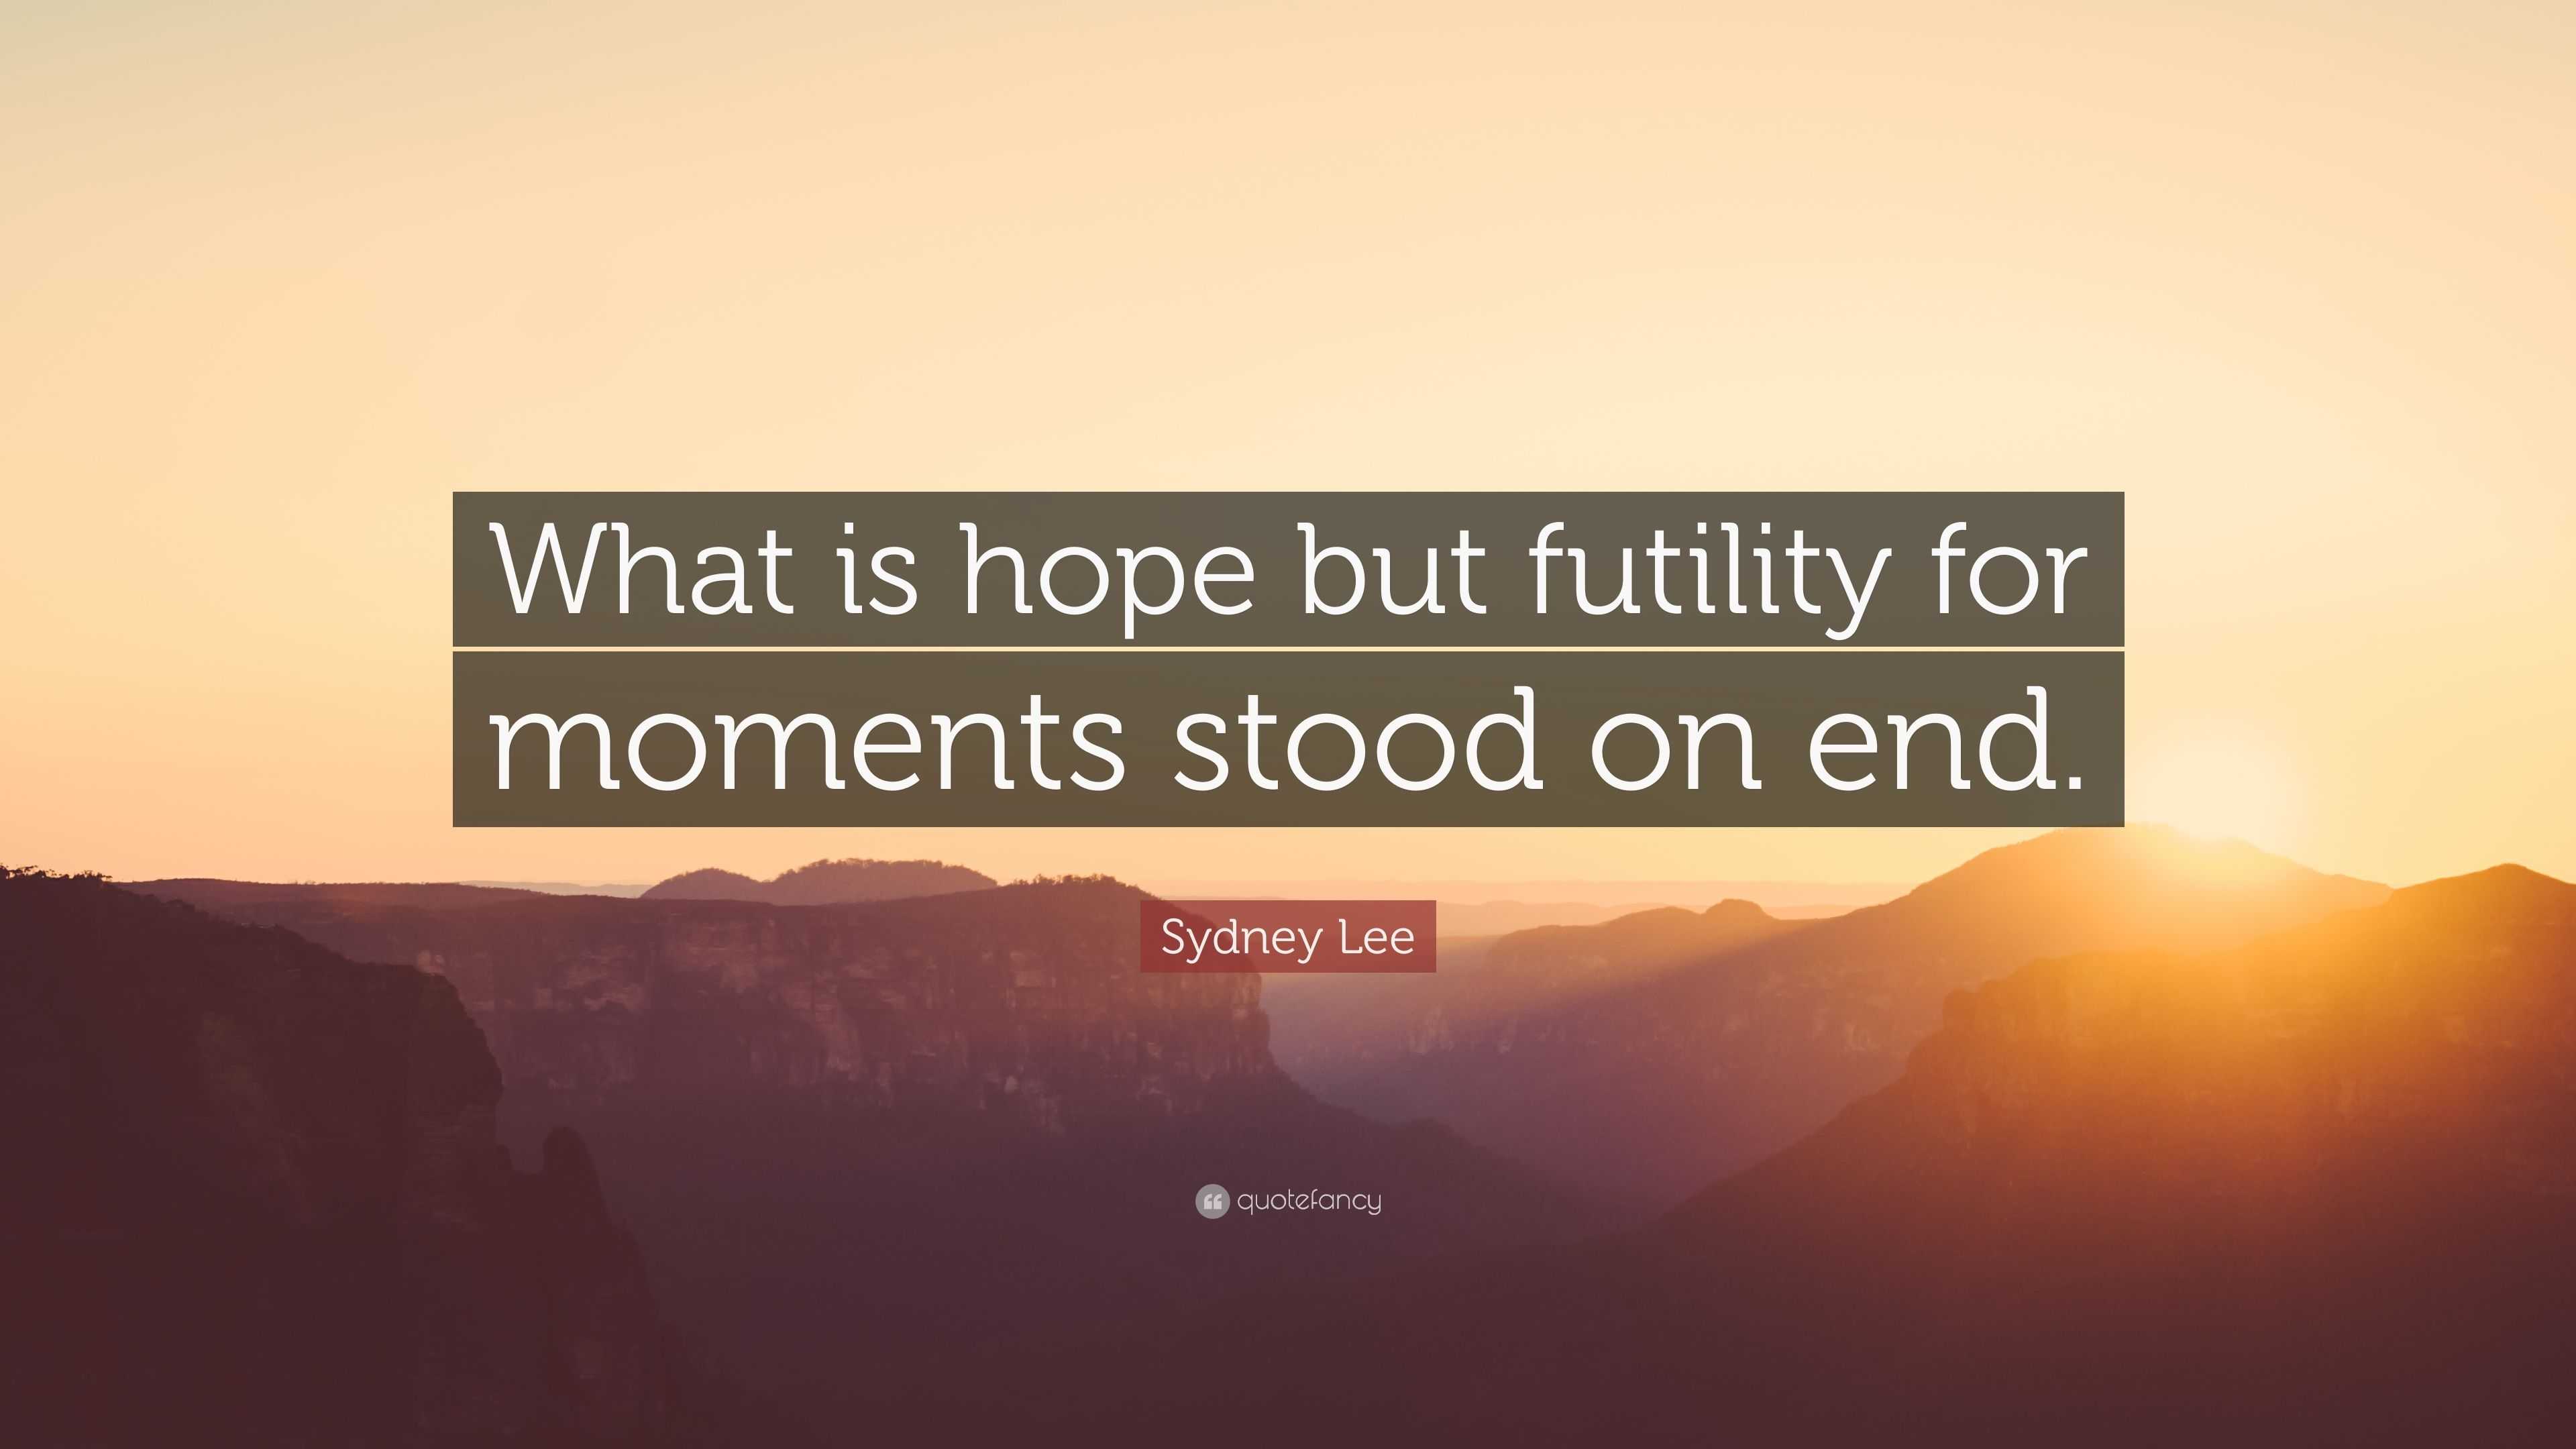 Sydney Lee Quote: “What is hope but futility for moments stood on end.”